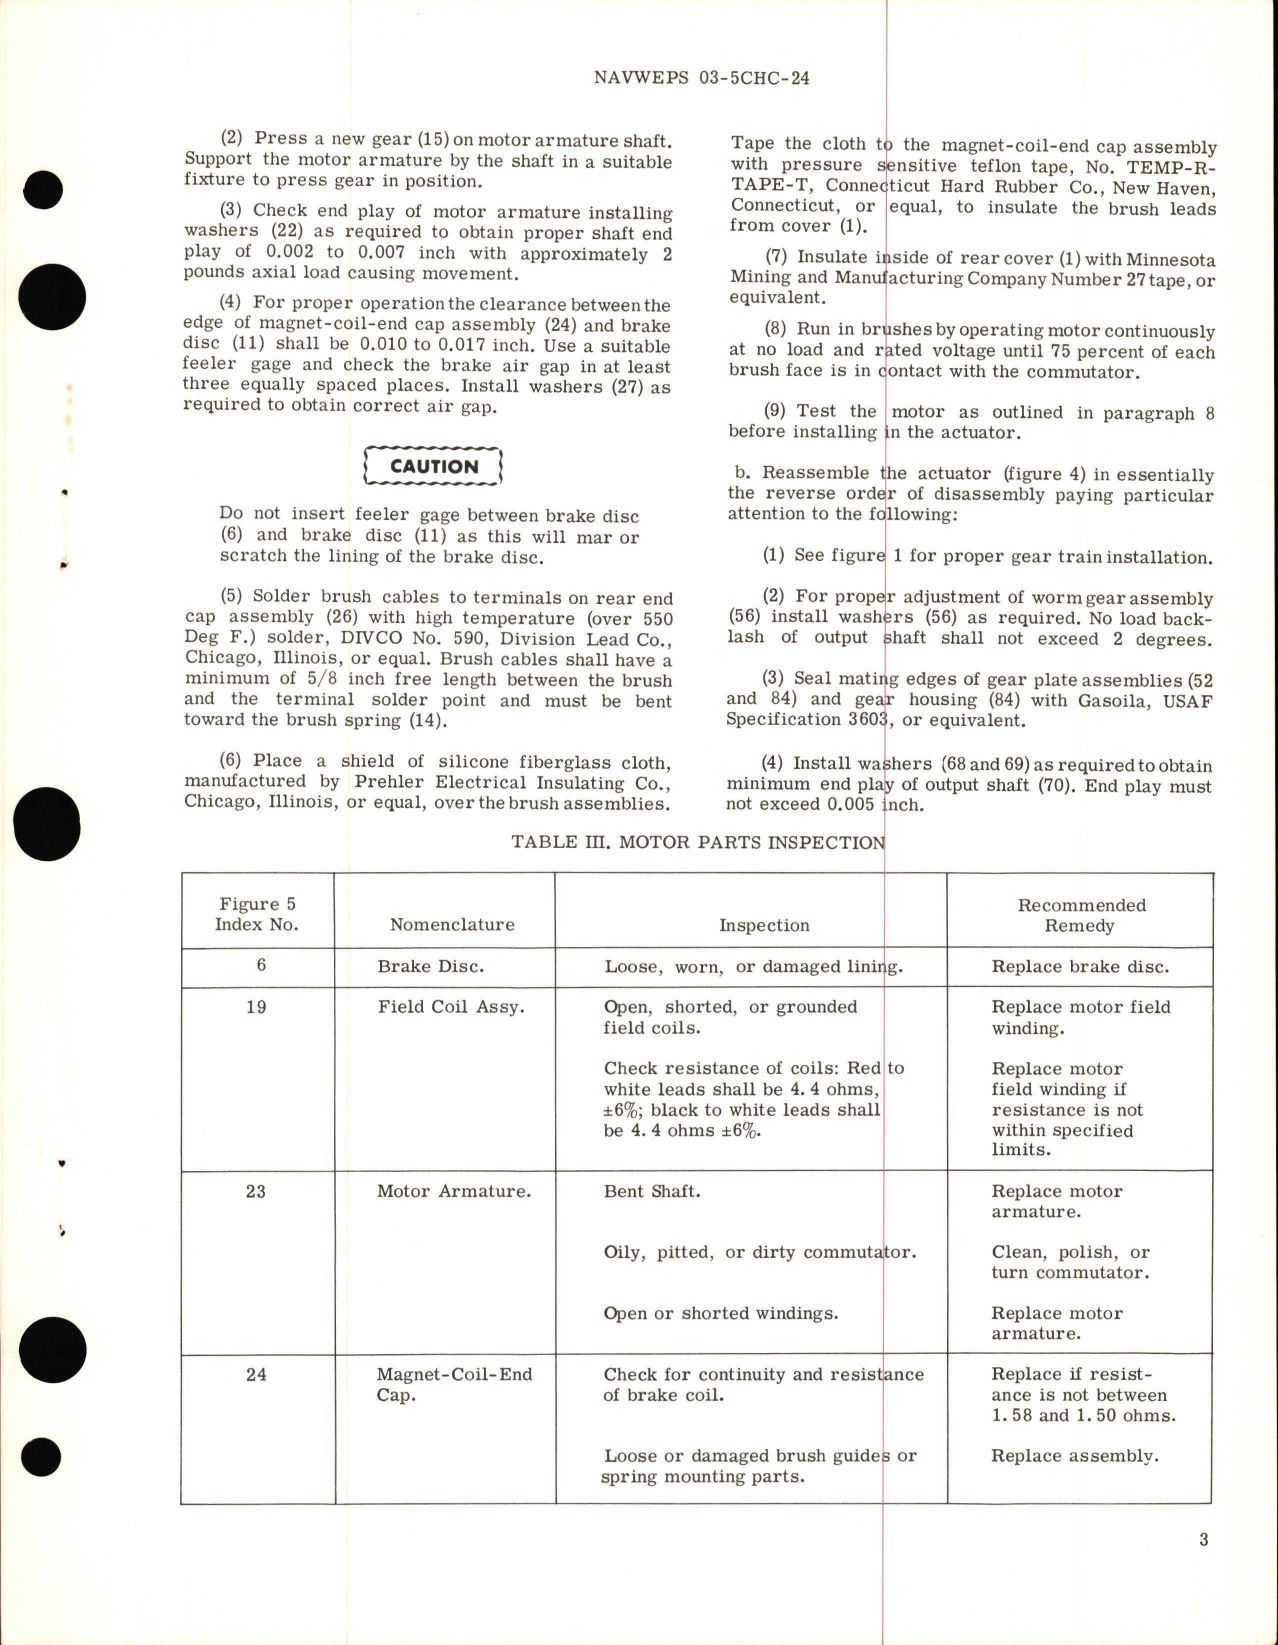 Sample page 5 from AirCorps Library document: Overhaul Instructions with Parts Breakdown for Electromechanical Rotary Actuator - Part HYLC 7684 